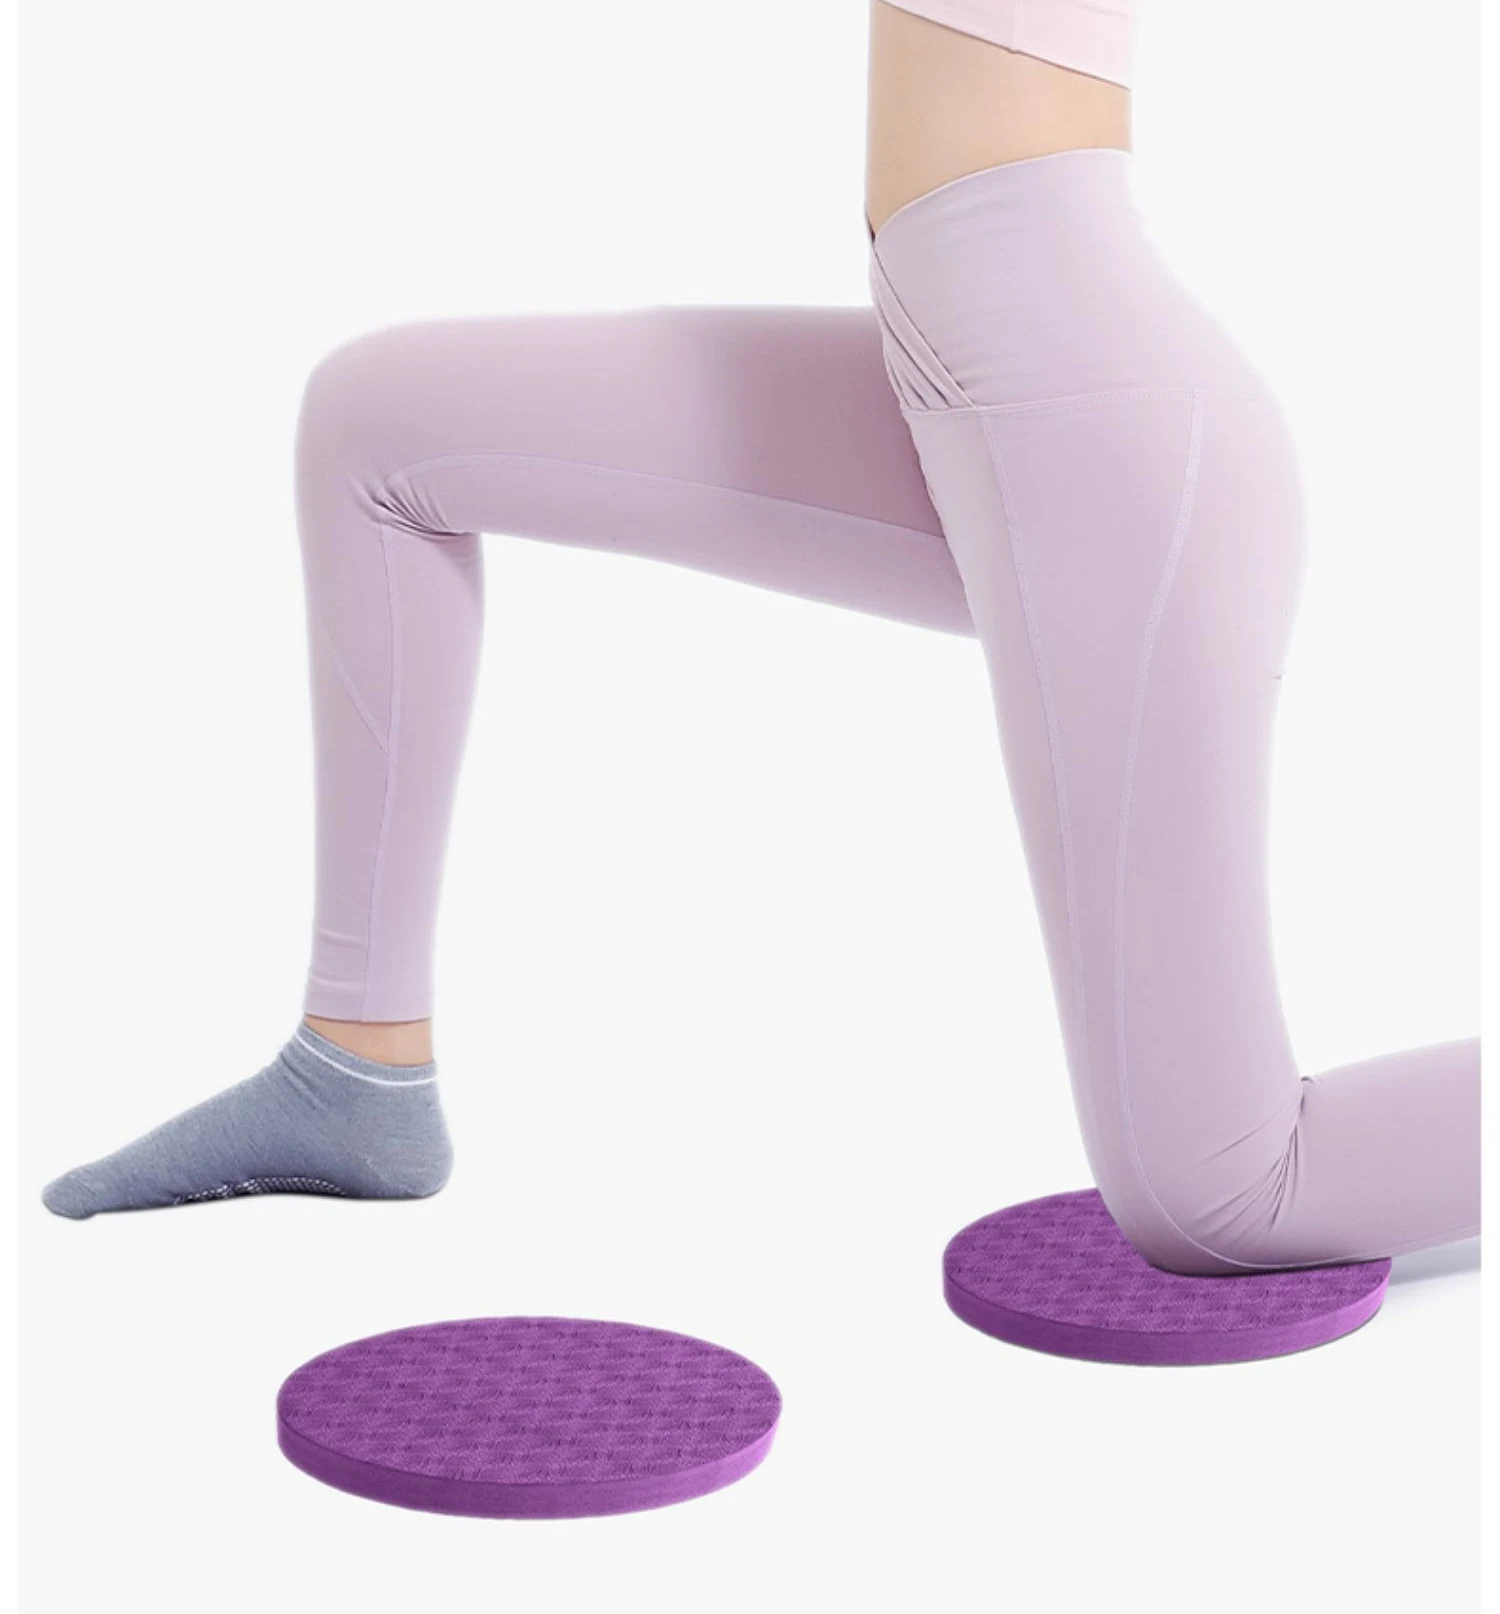 1Pair Anti-slip Yoga Mat Cushion Portable Fitness Exercise Knee Pads Cusion For Knee Wrist Hips Hands Elbows Balance Support Pad